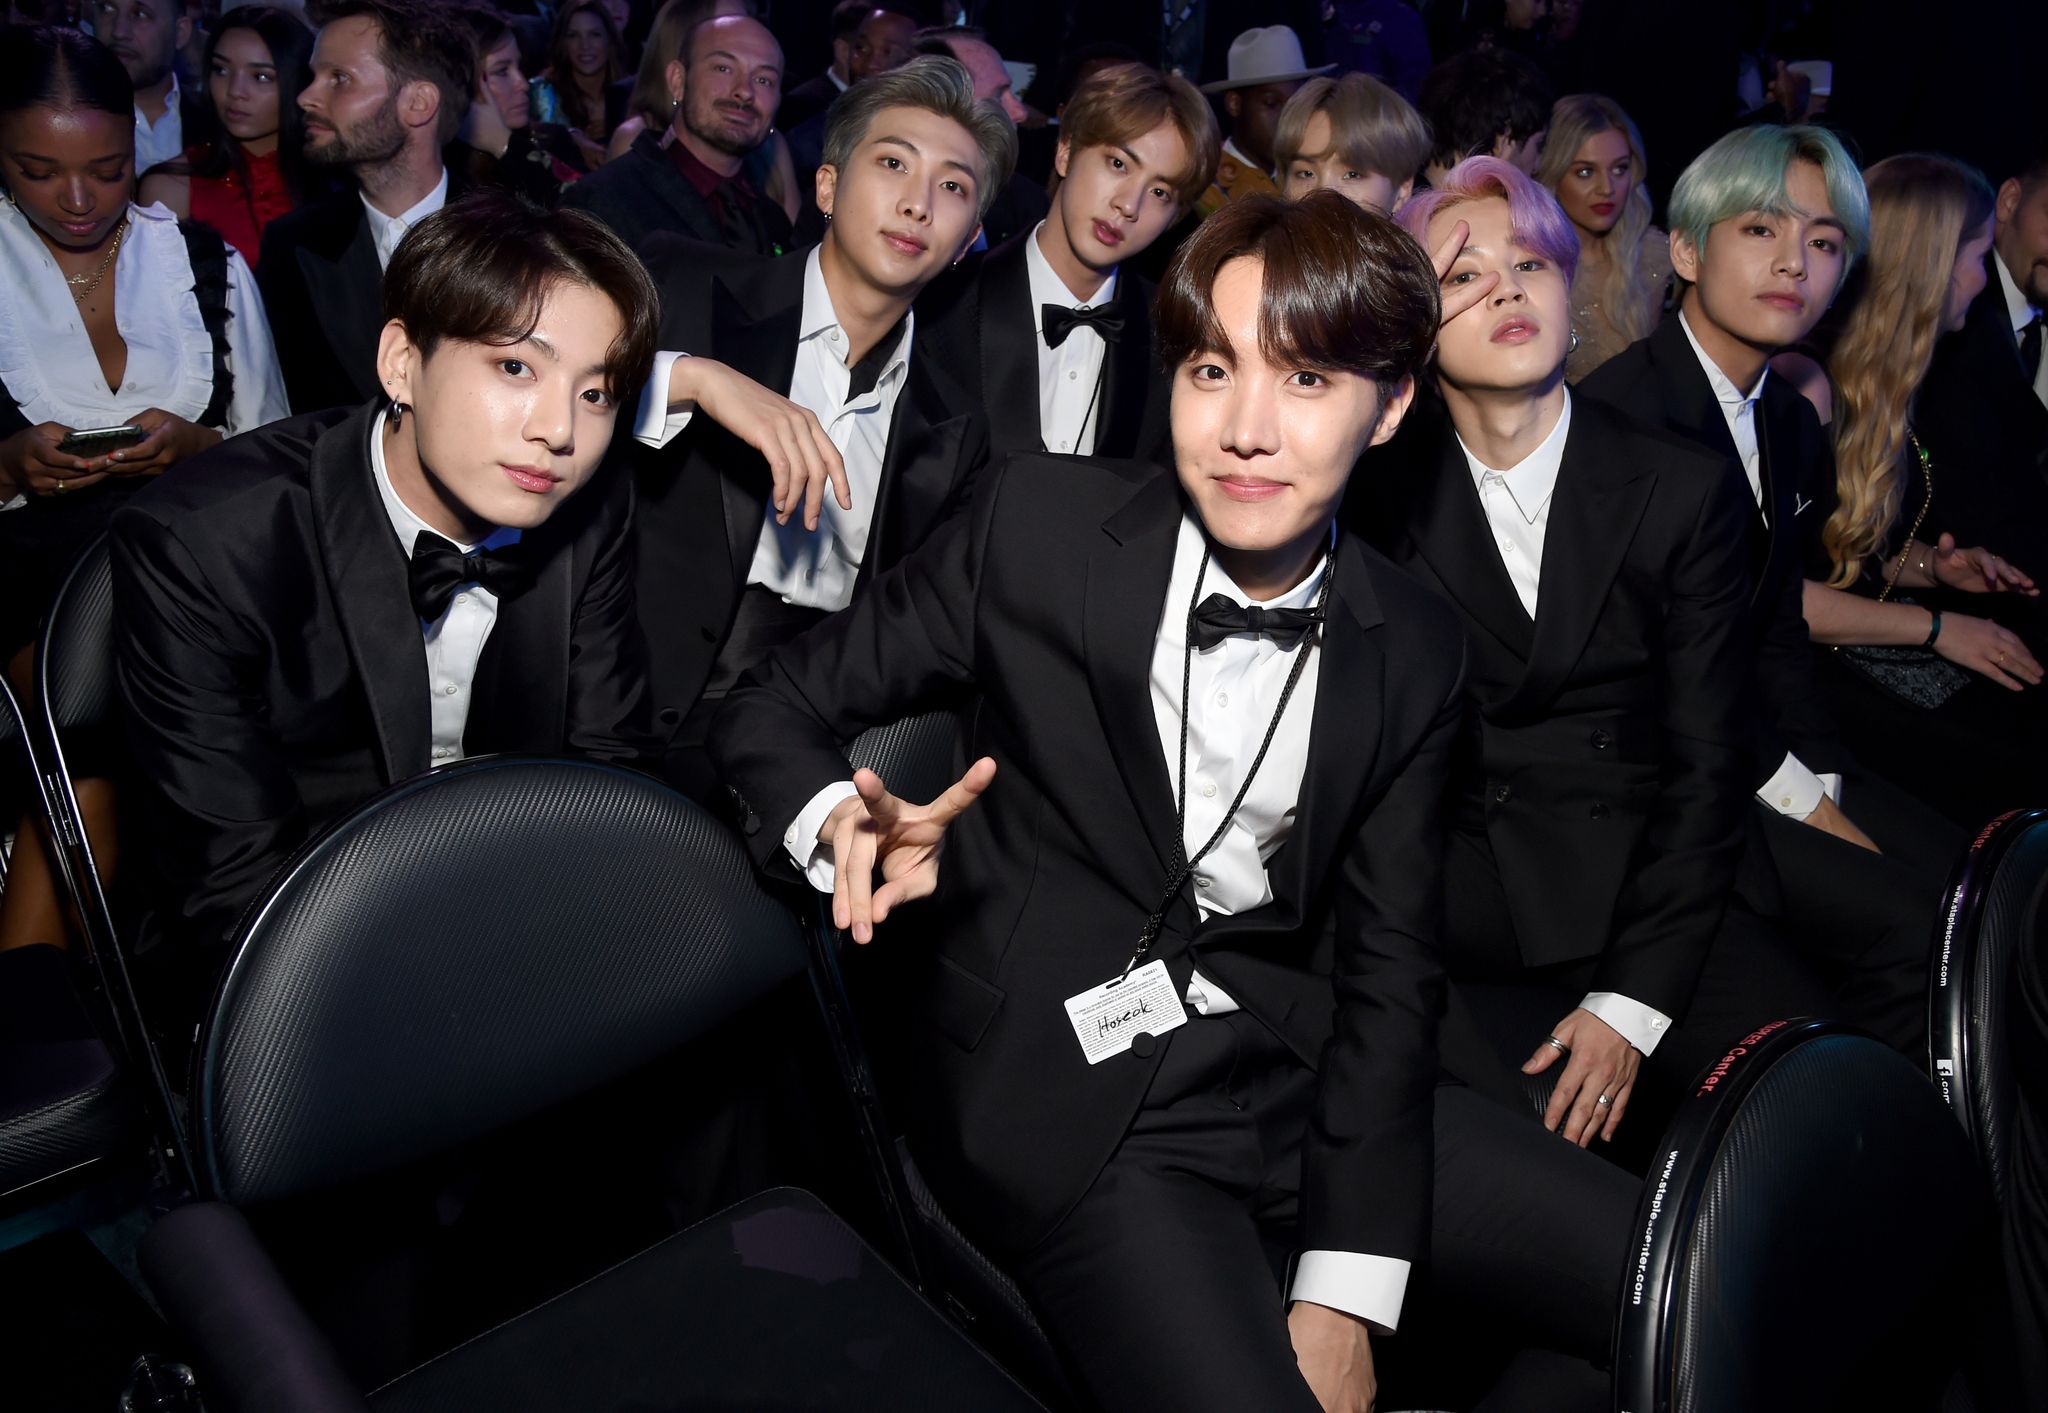 BTS' 2019 Grammy tuxedos to be displayed at Grammy Museum 